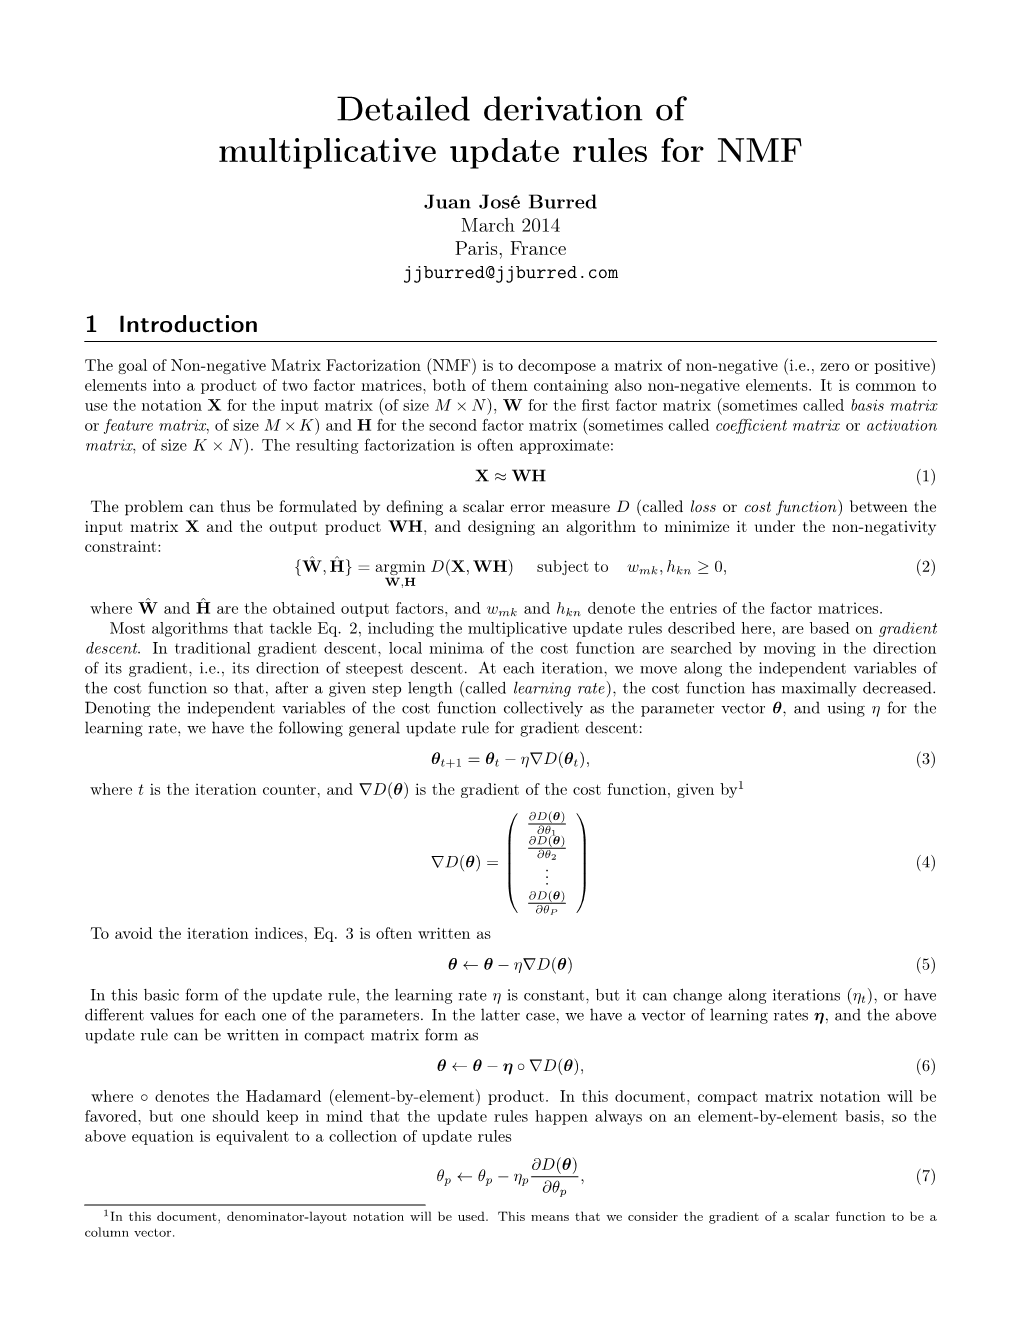 Detailed Derivation of Multiplicative Update Rules for NMF